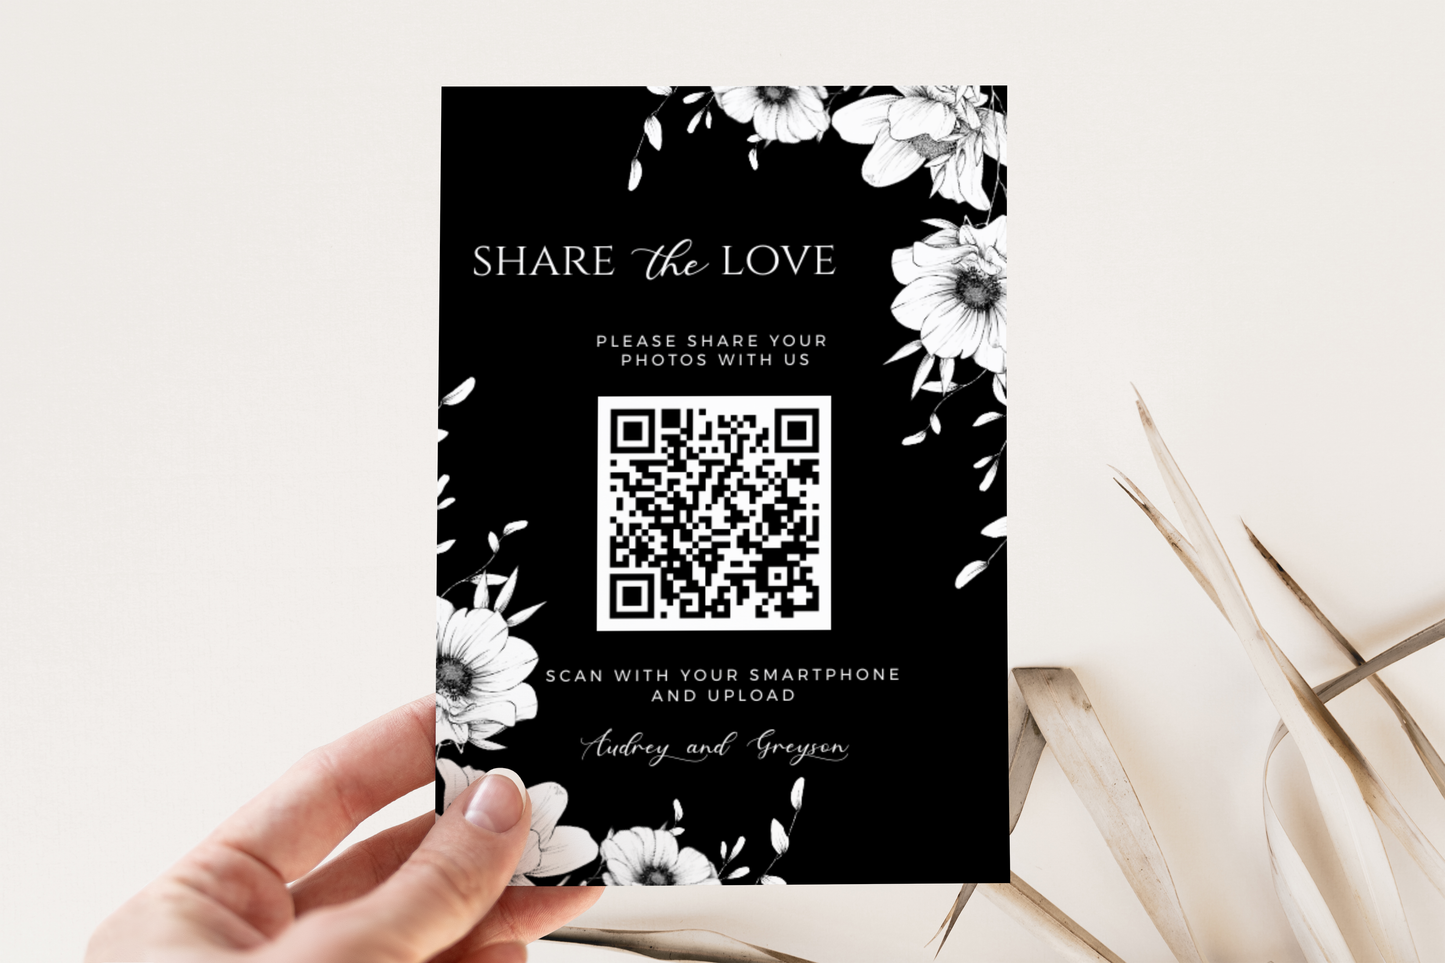 Share The Love Black Anemone Wedding Photo Sharing Sign With QR Code